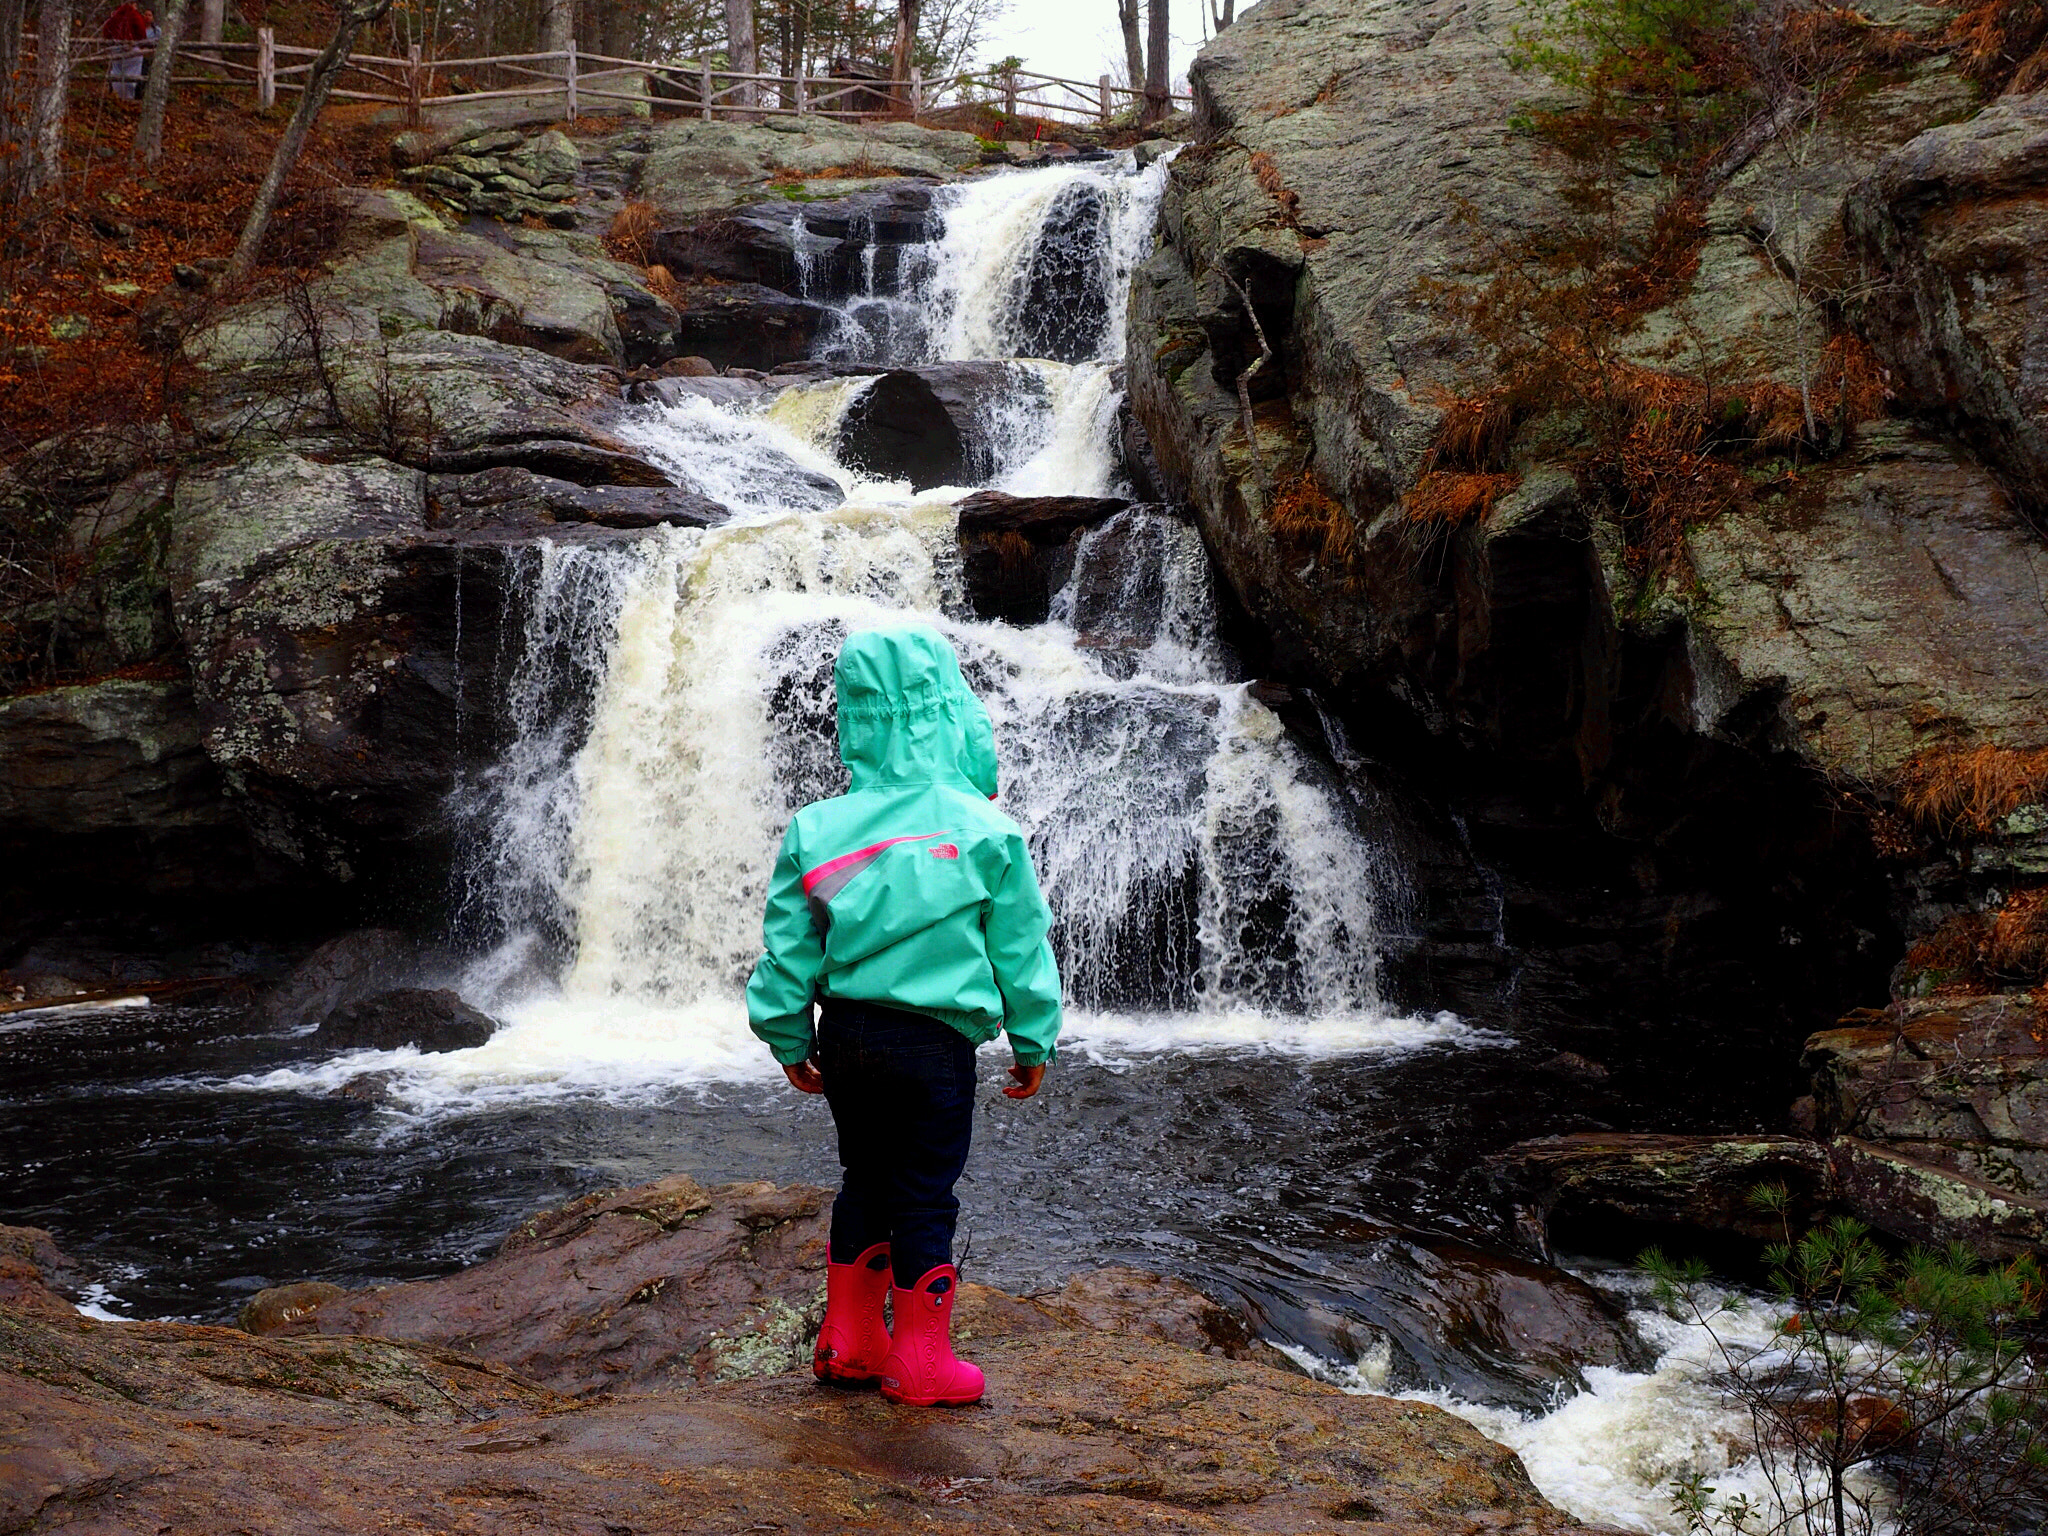 Olympus OM-D E-M10 sample photo. My daughter's first time at a local waterfall located in haddam, ct. photography